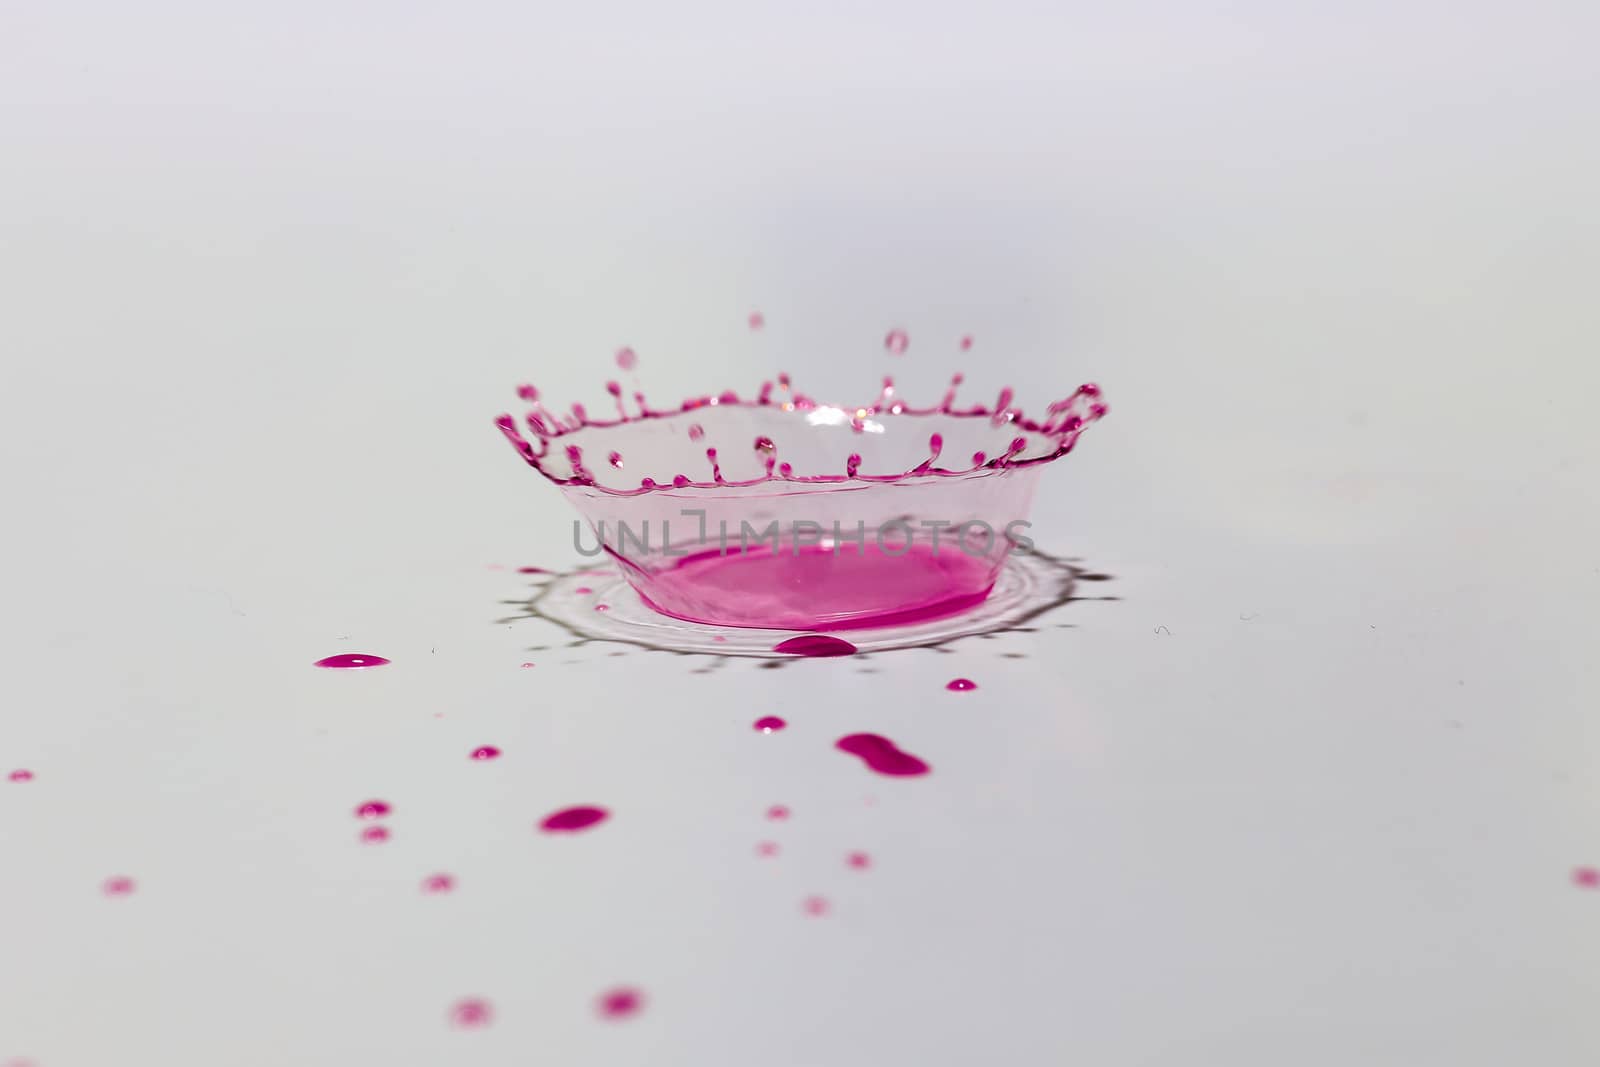 Pink water drop explosion by chuckyq1